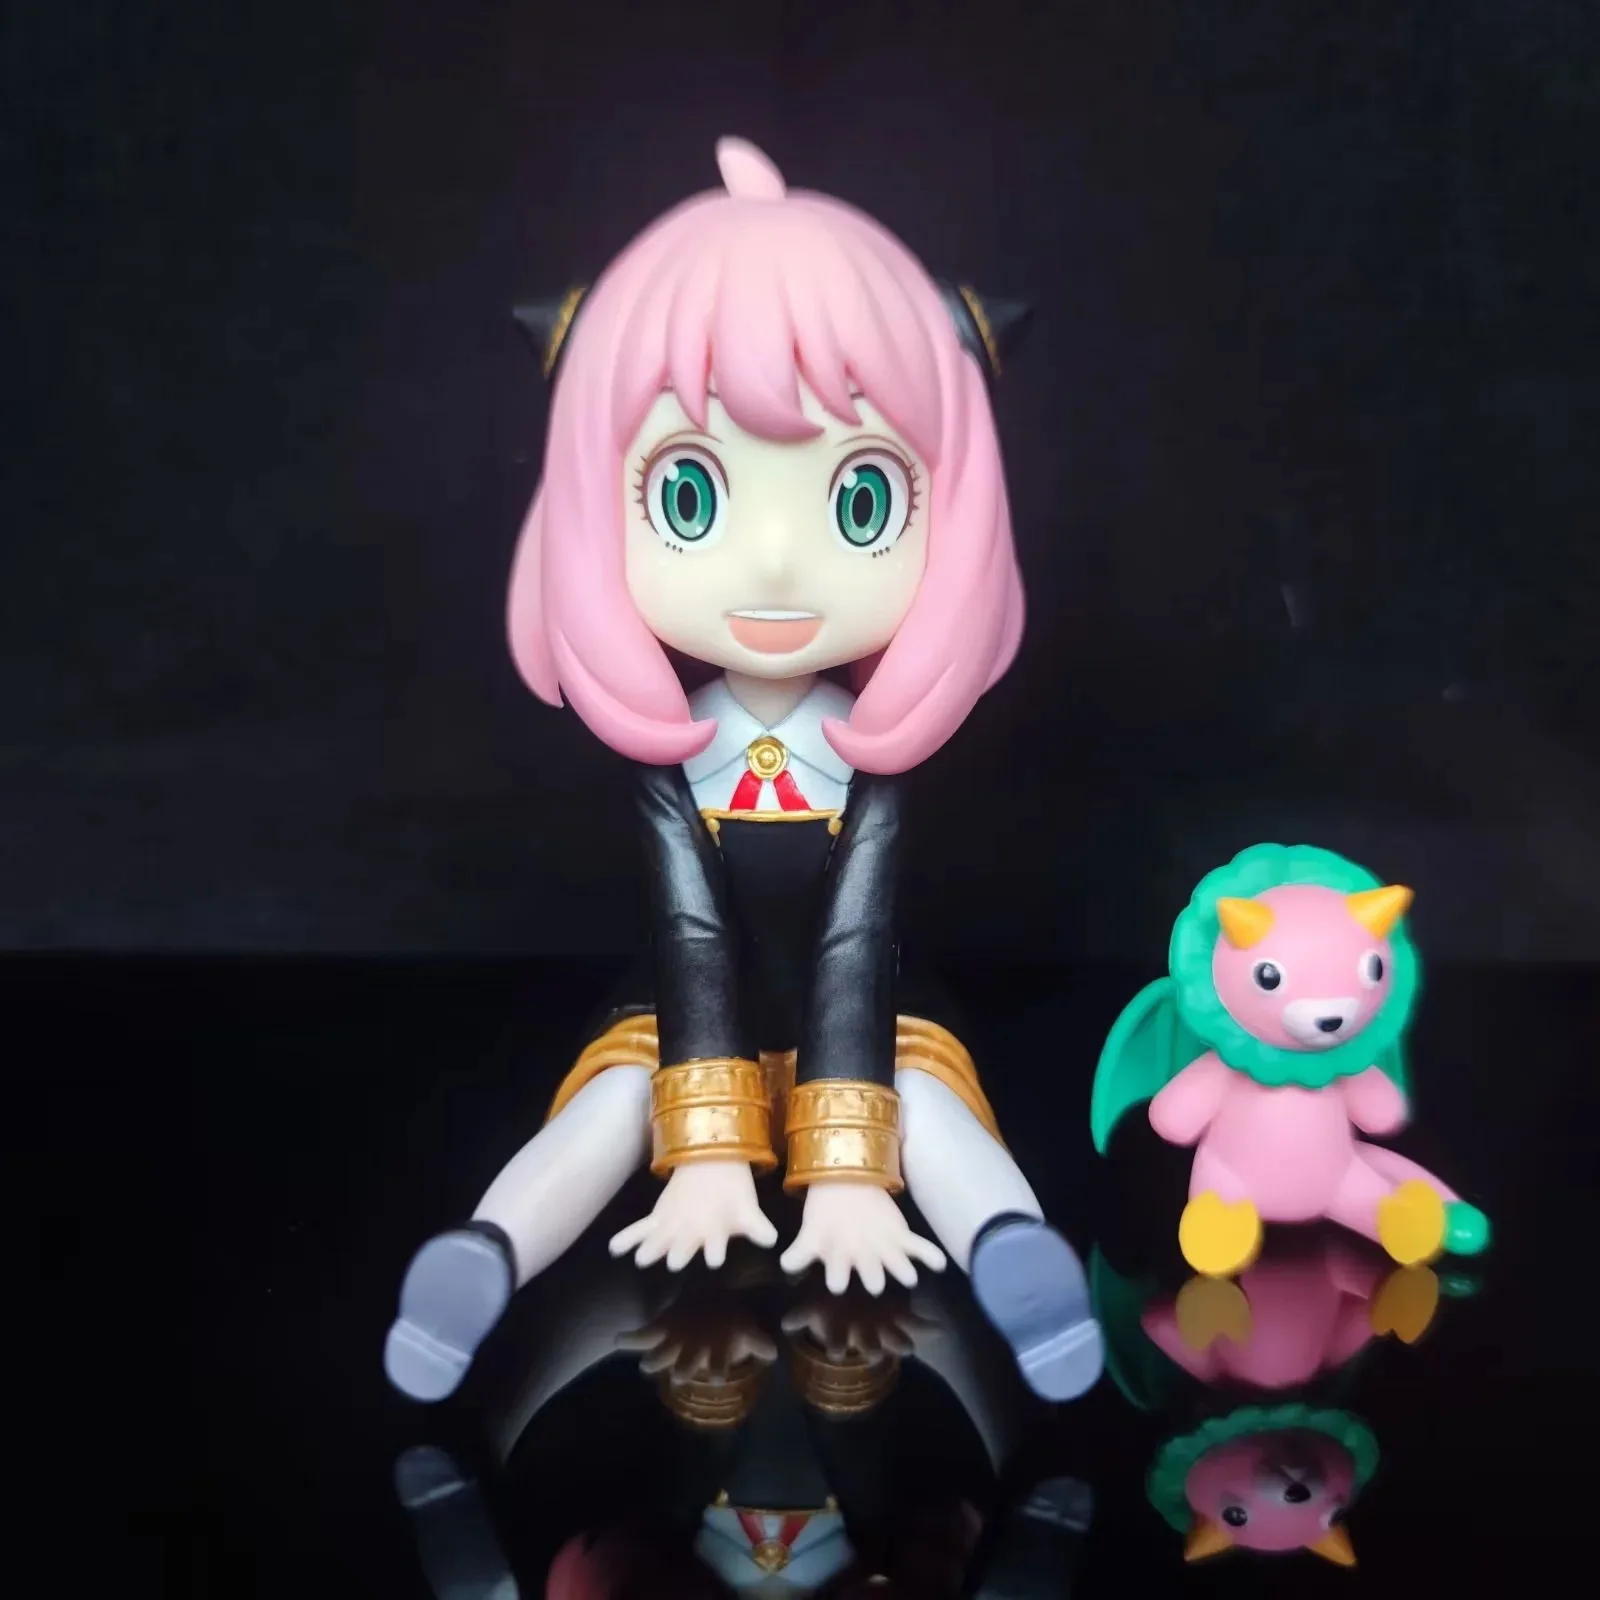 Boxed 10CM Anime SPY x FAMILY Anya Forger chimera Kawaii Sitting posture figure PVC Model car Ornaments collection Toy doll gift images - 6